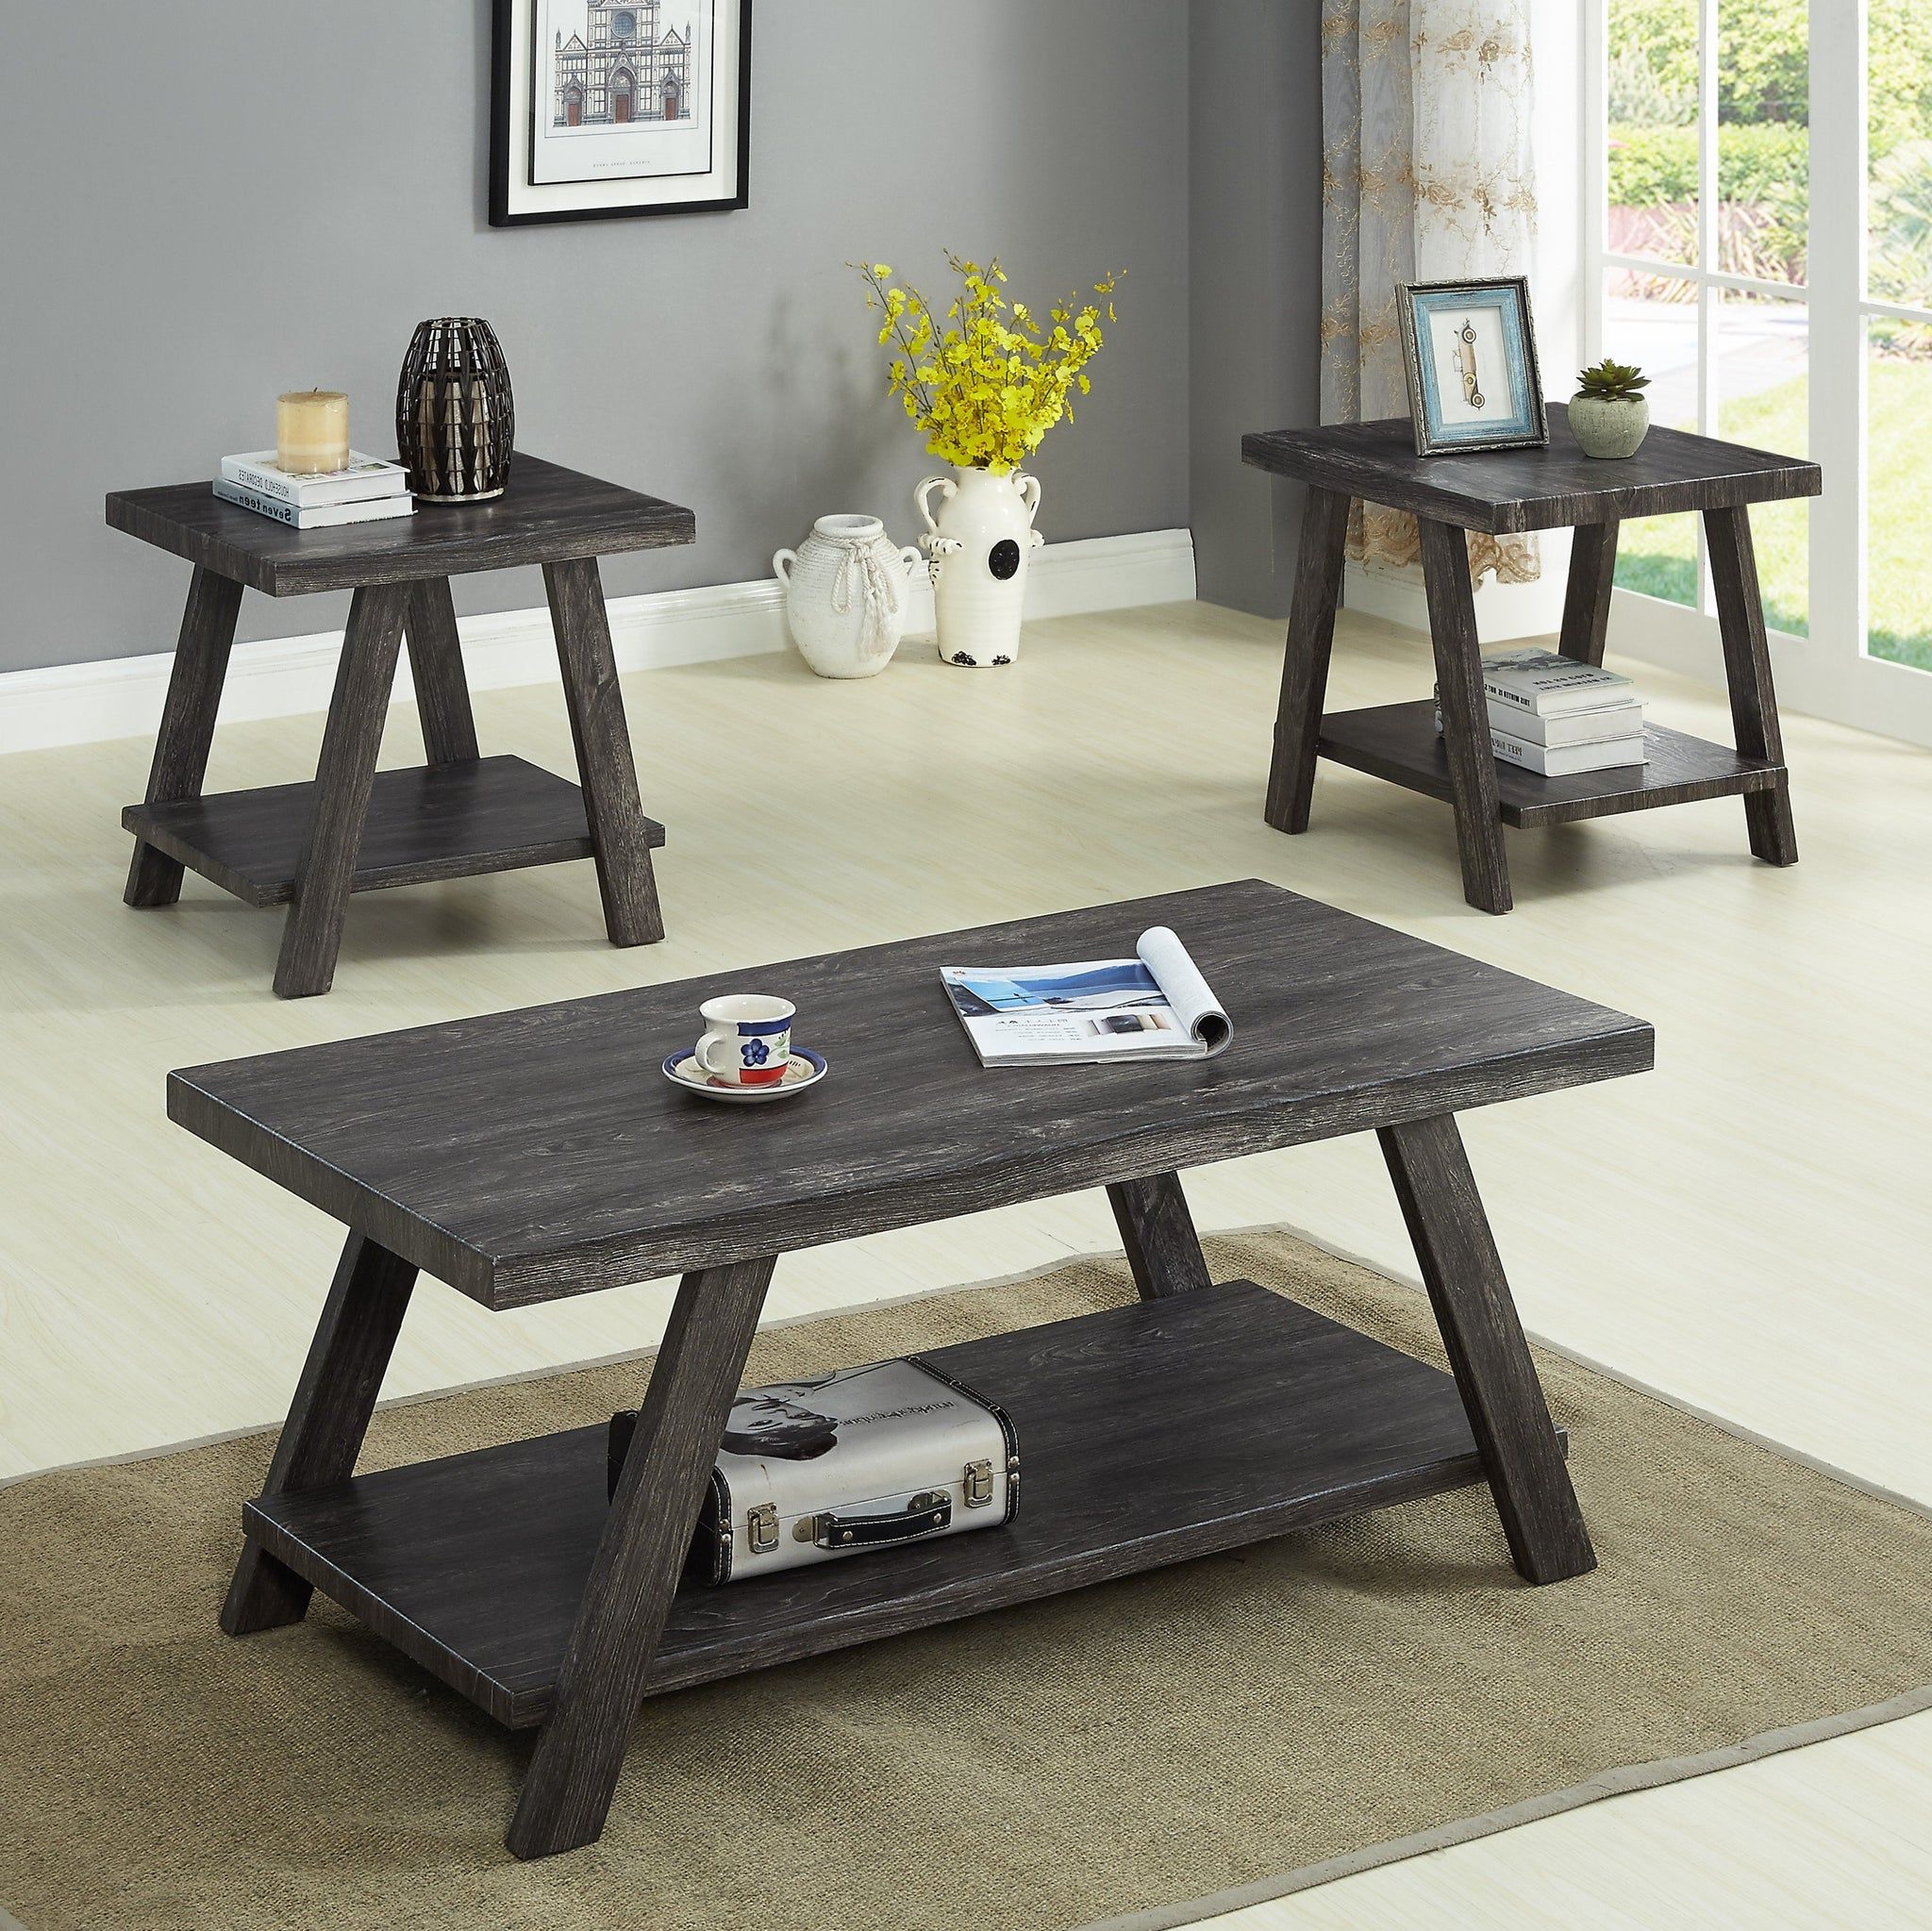 Pemberly Row Replicated Wood Coffee Tables With Regard To Favorite Athens Contemporary Replicated Wood Shelf Coffee Set Table In Charcoal (View 7 of 15)